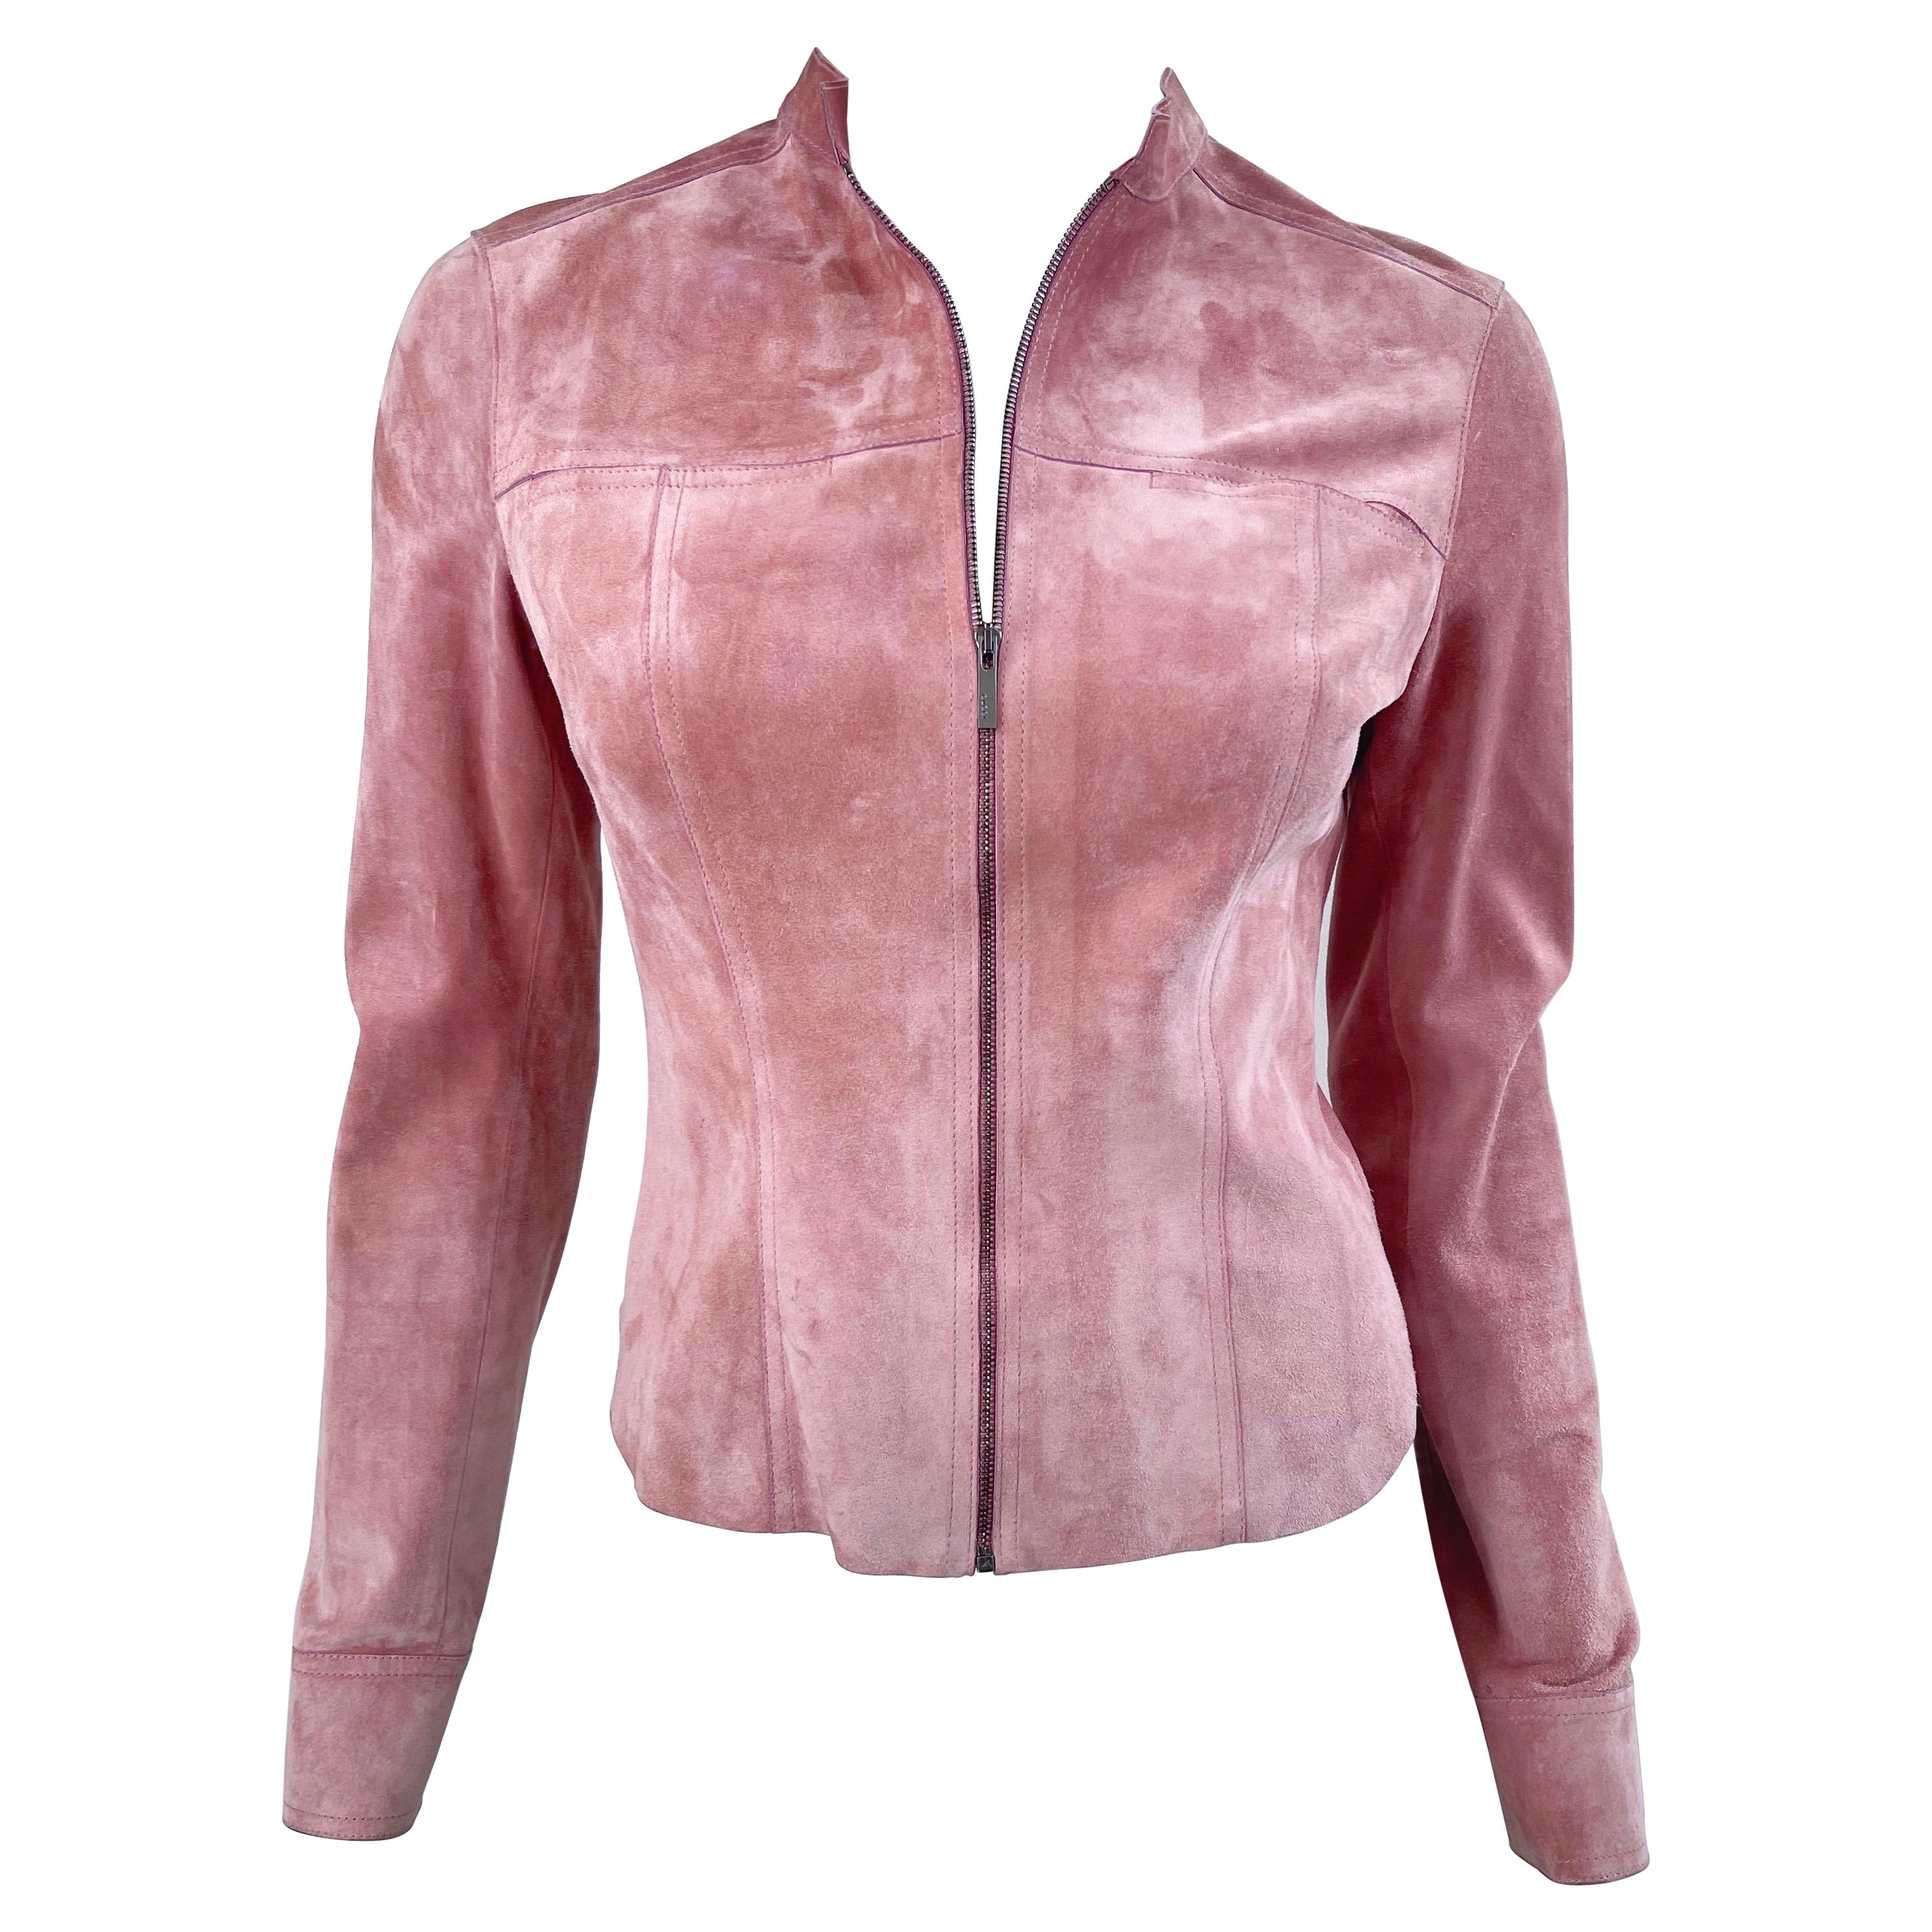 Gucci by Tom Ford Pink Mauve Dusty Rose Suede Leather Vintage Jacket 